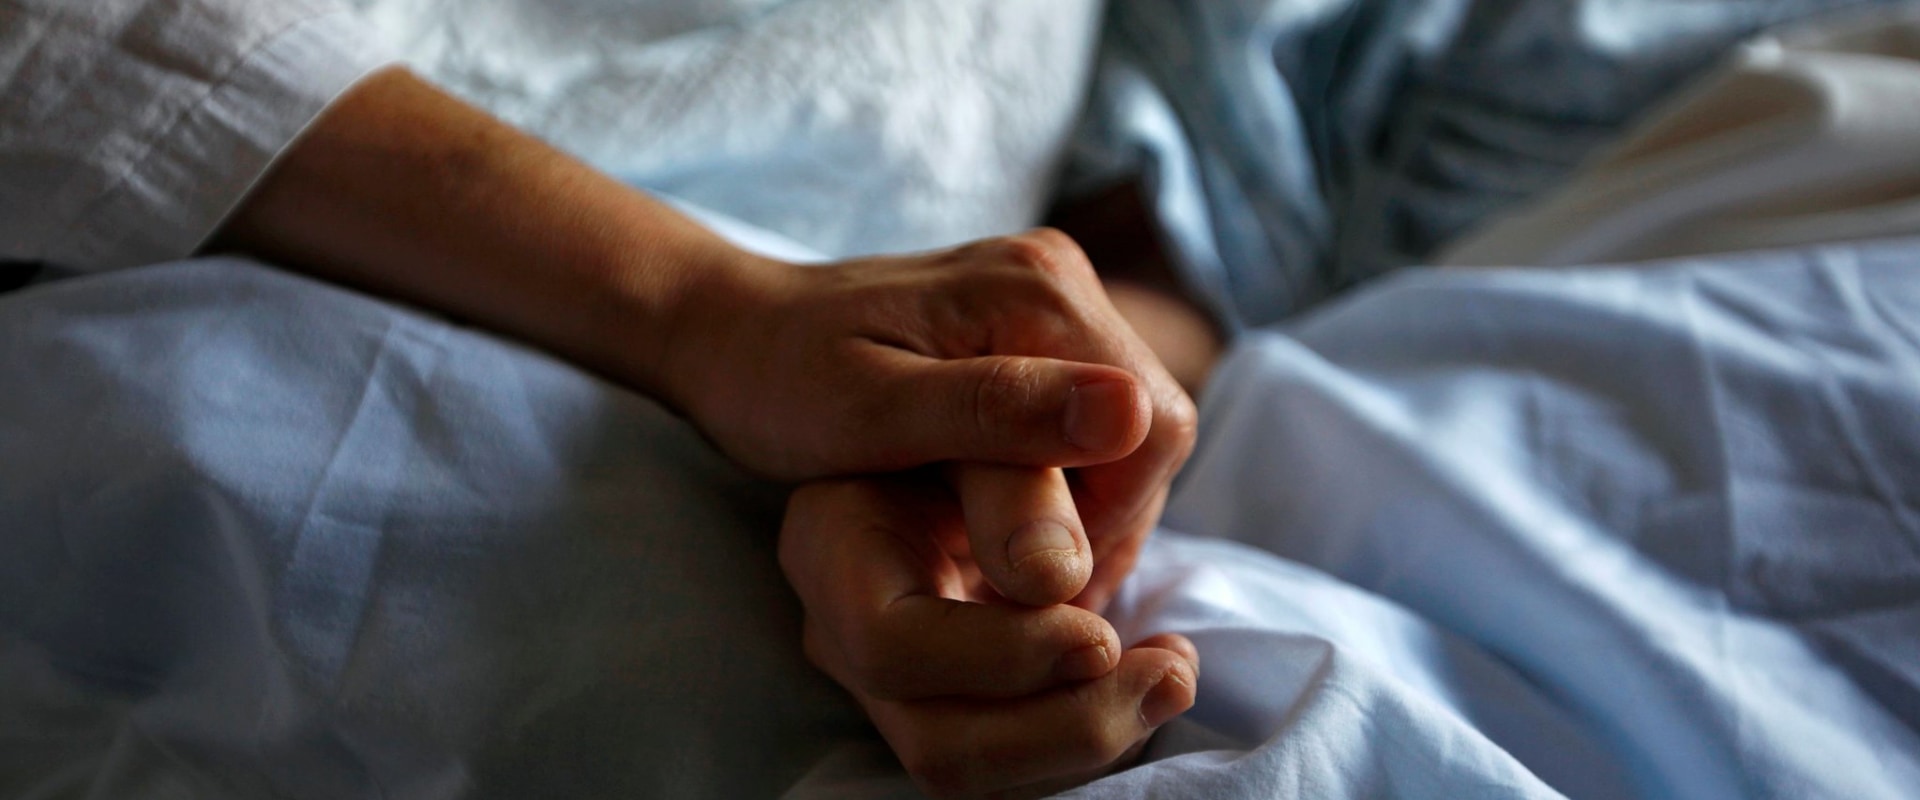 Does hospice always mean the end of life?